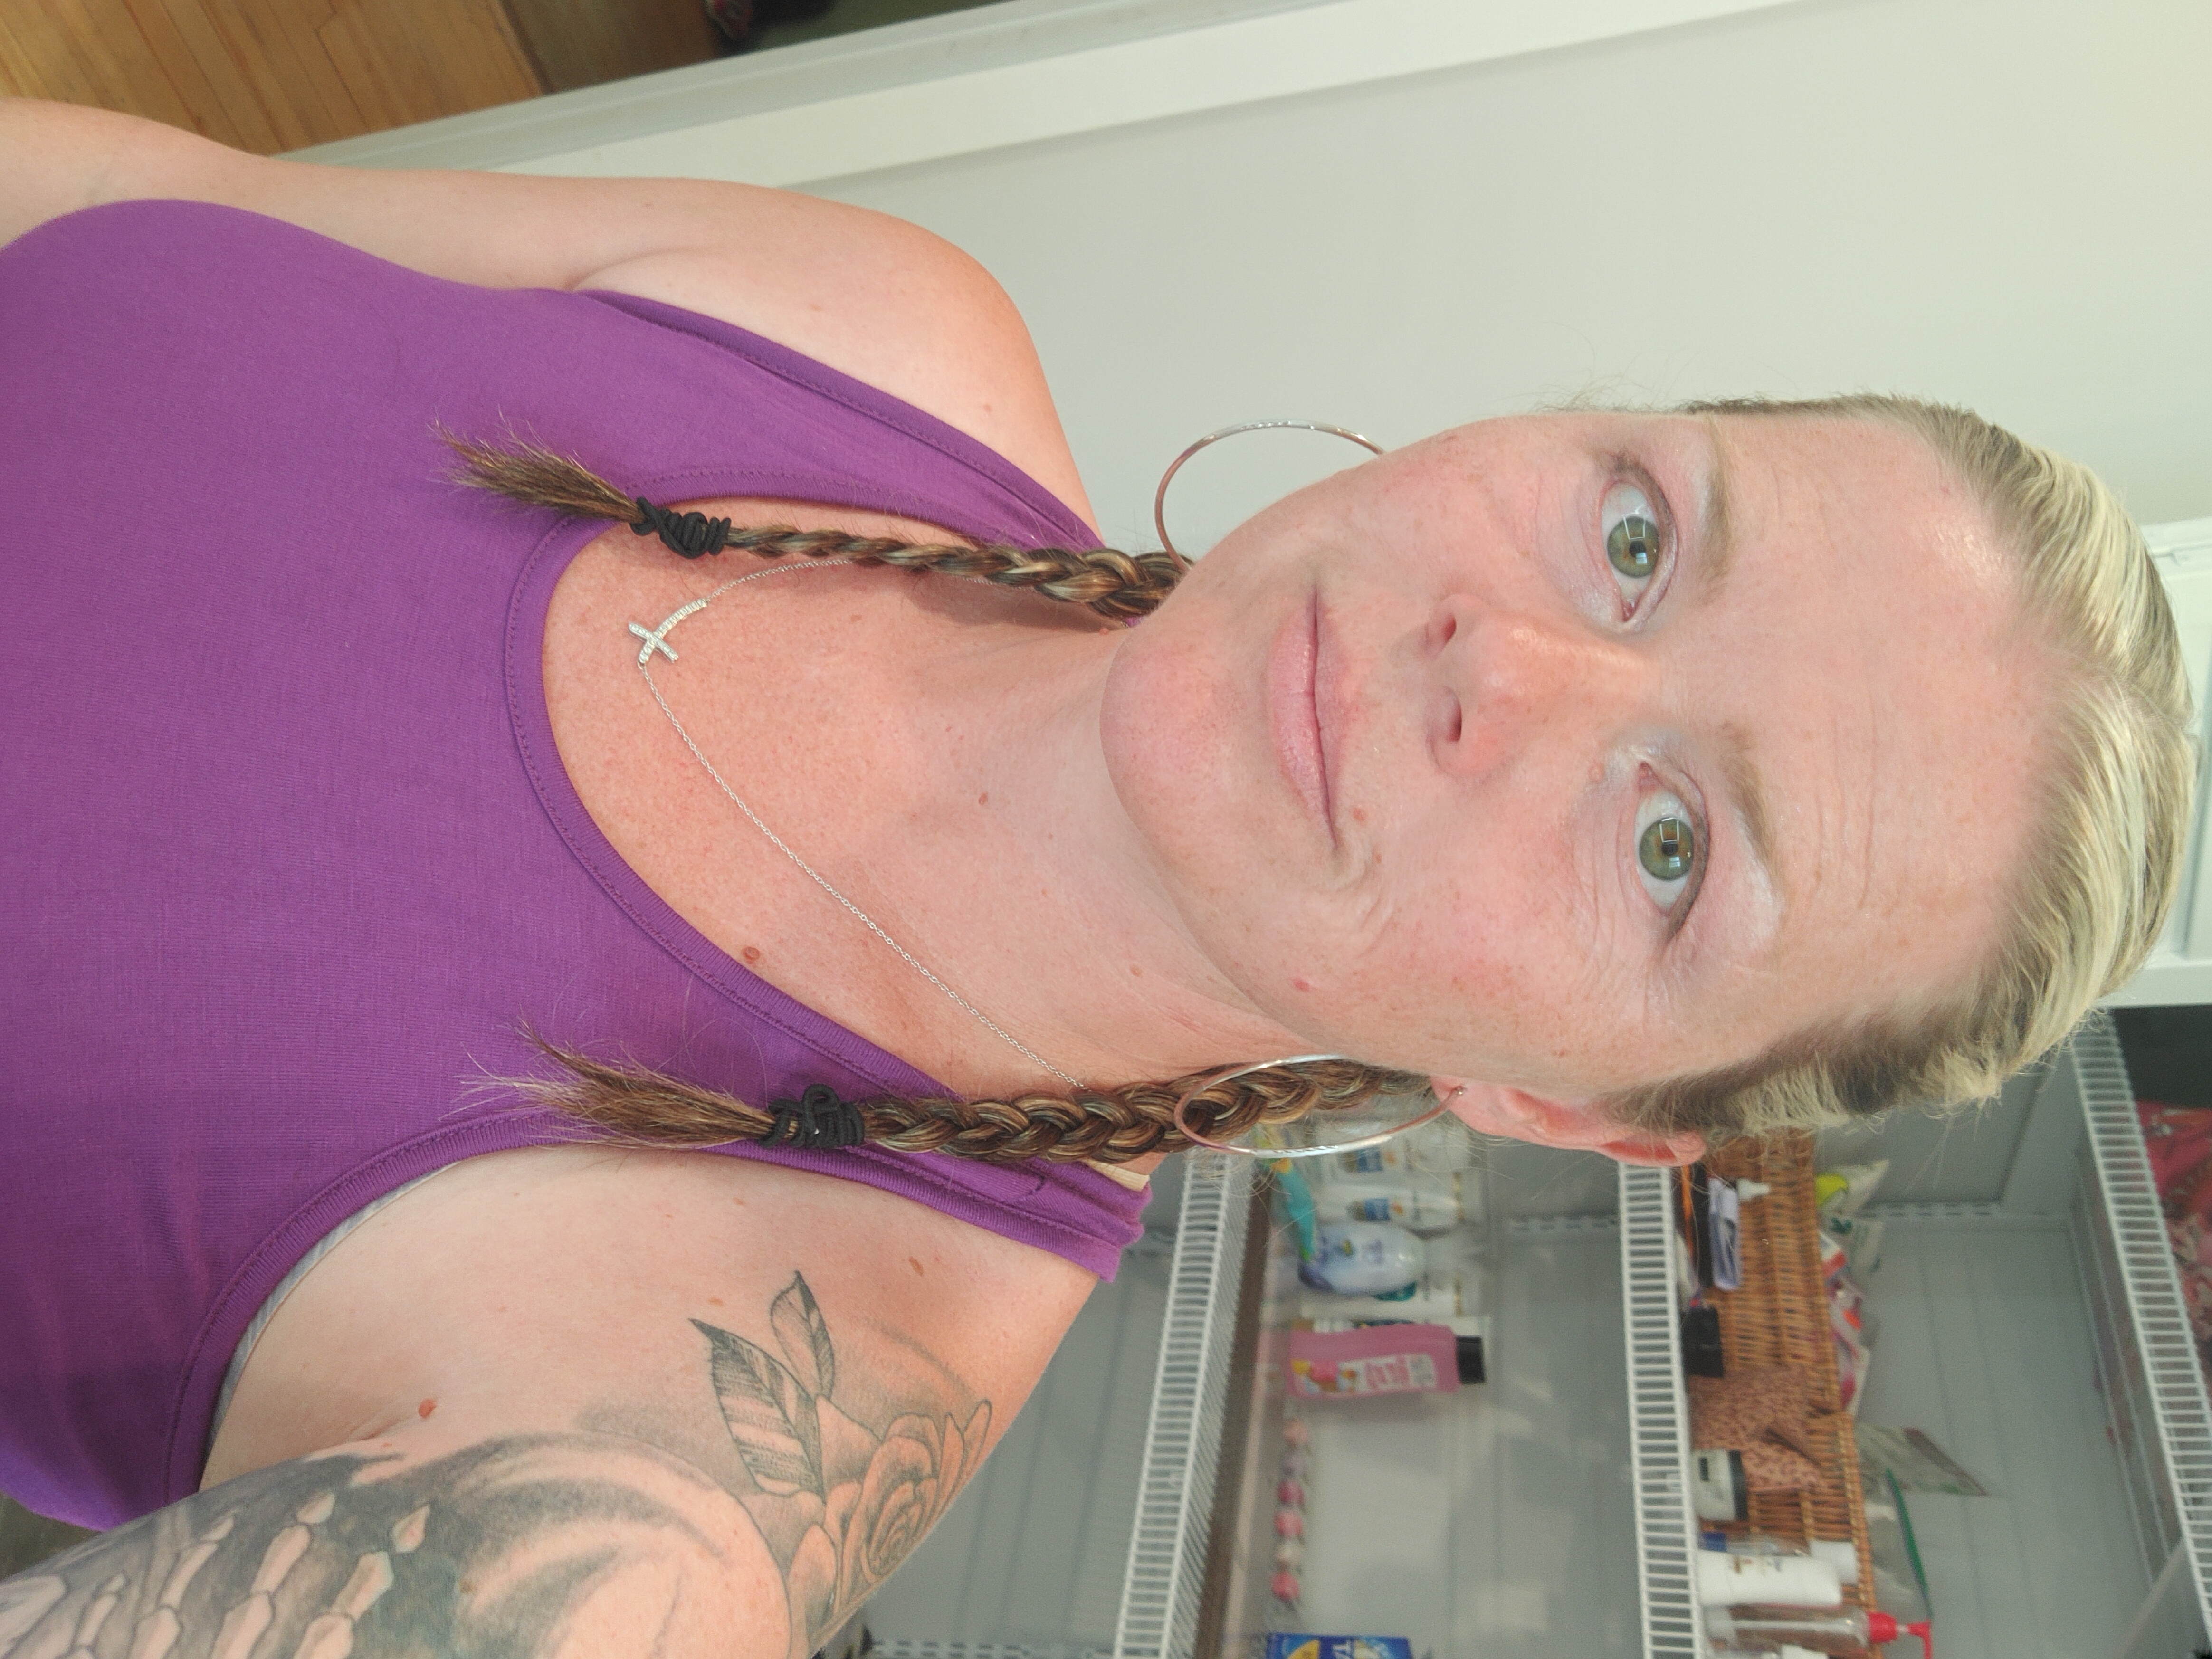 A person taking a selfie with blonde braids, a pink tank top, and tattoos on their left arm.